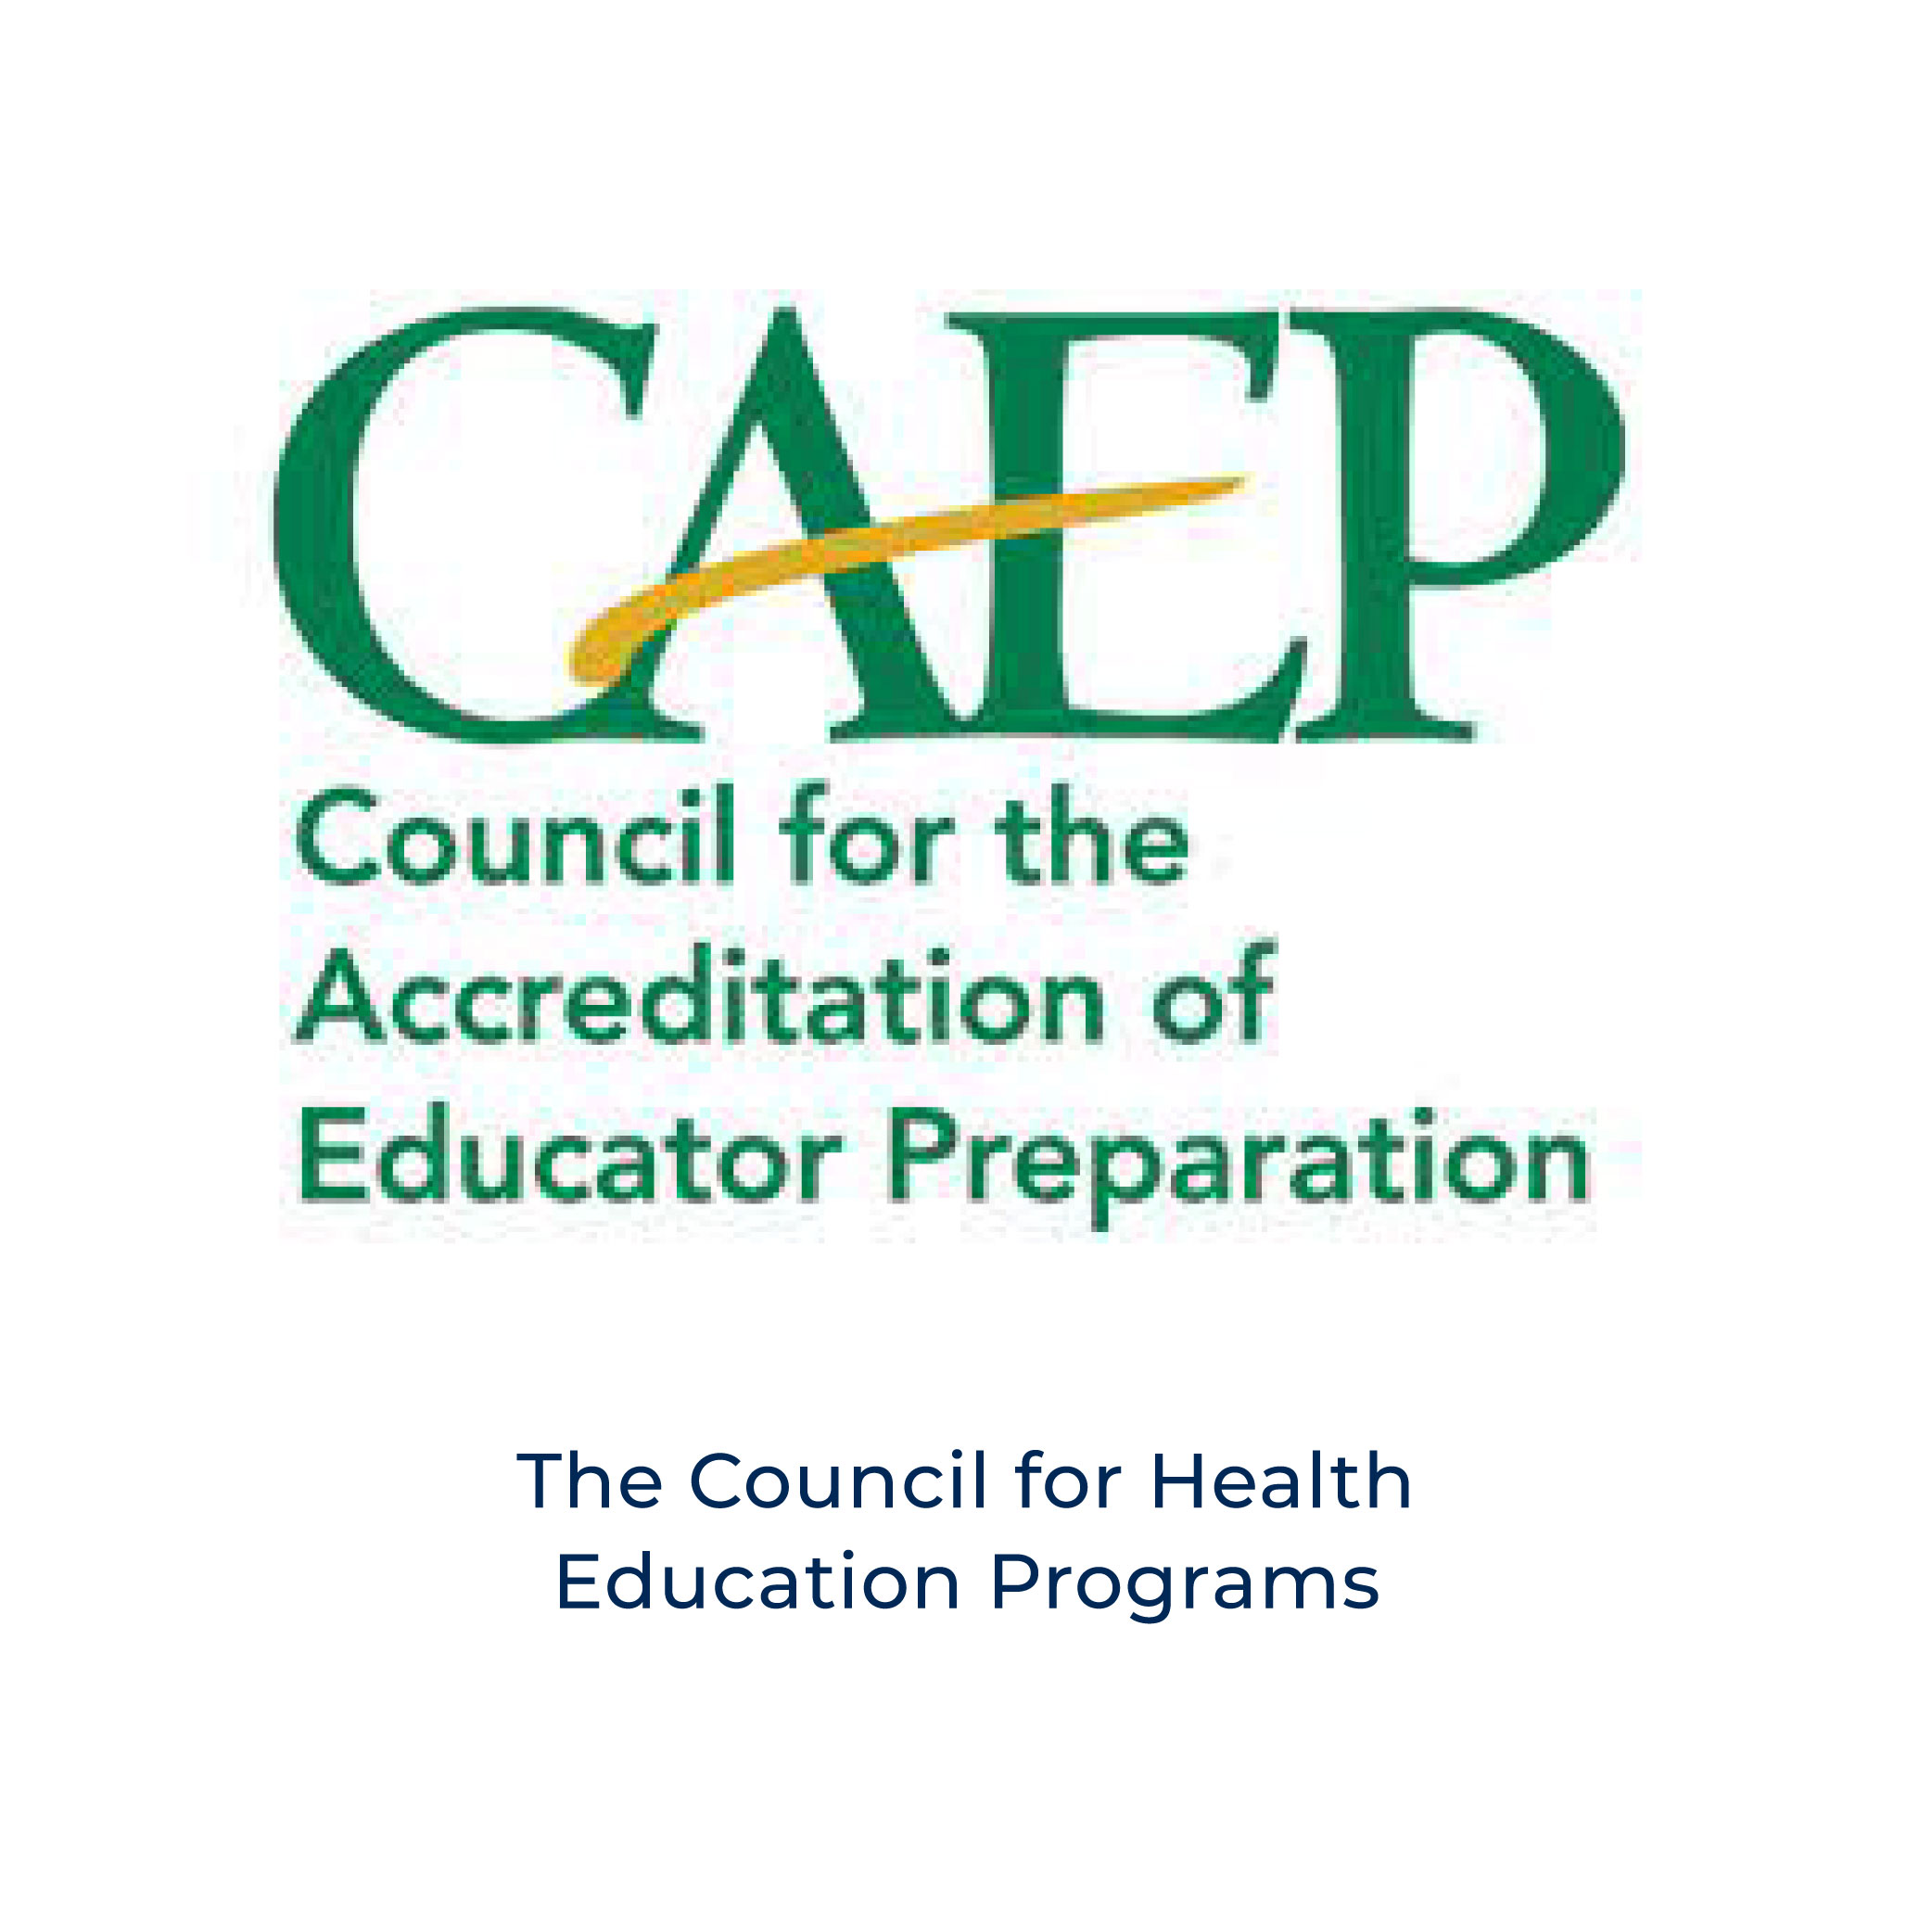 The Council for the Accreditation of Educator Preparation